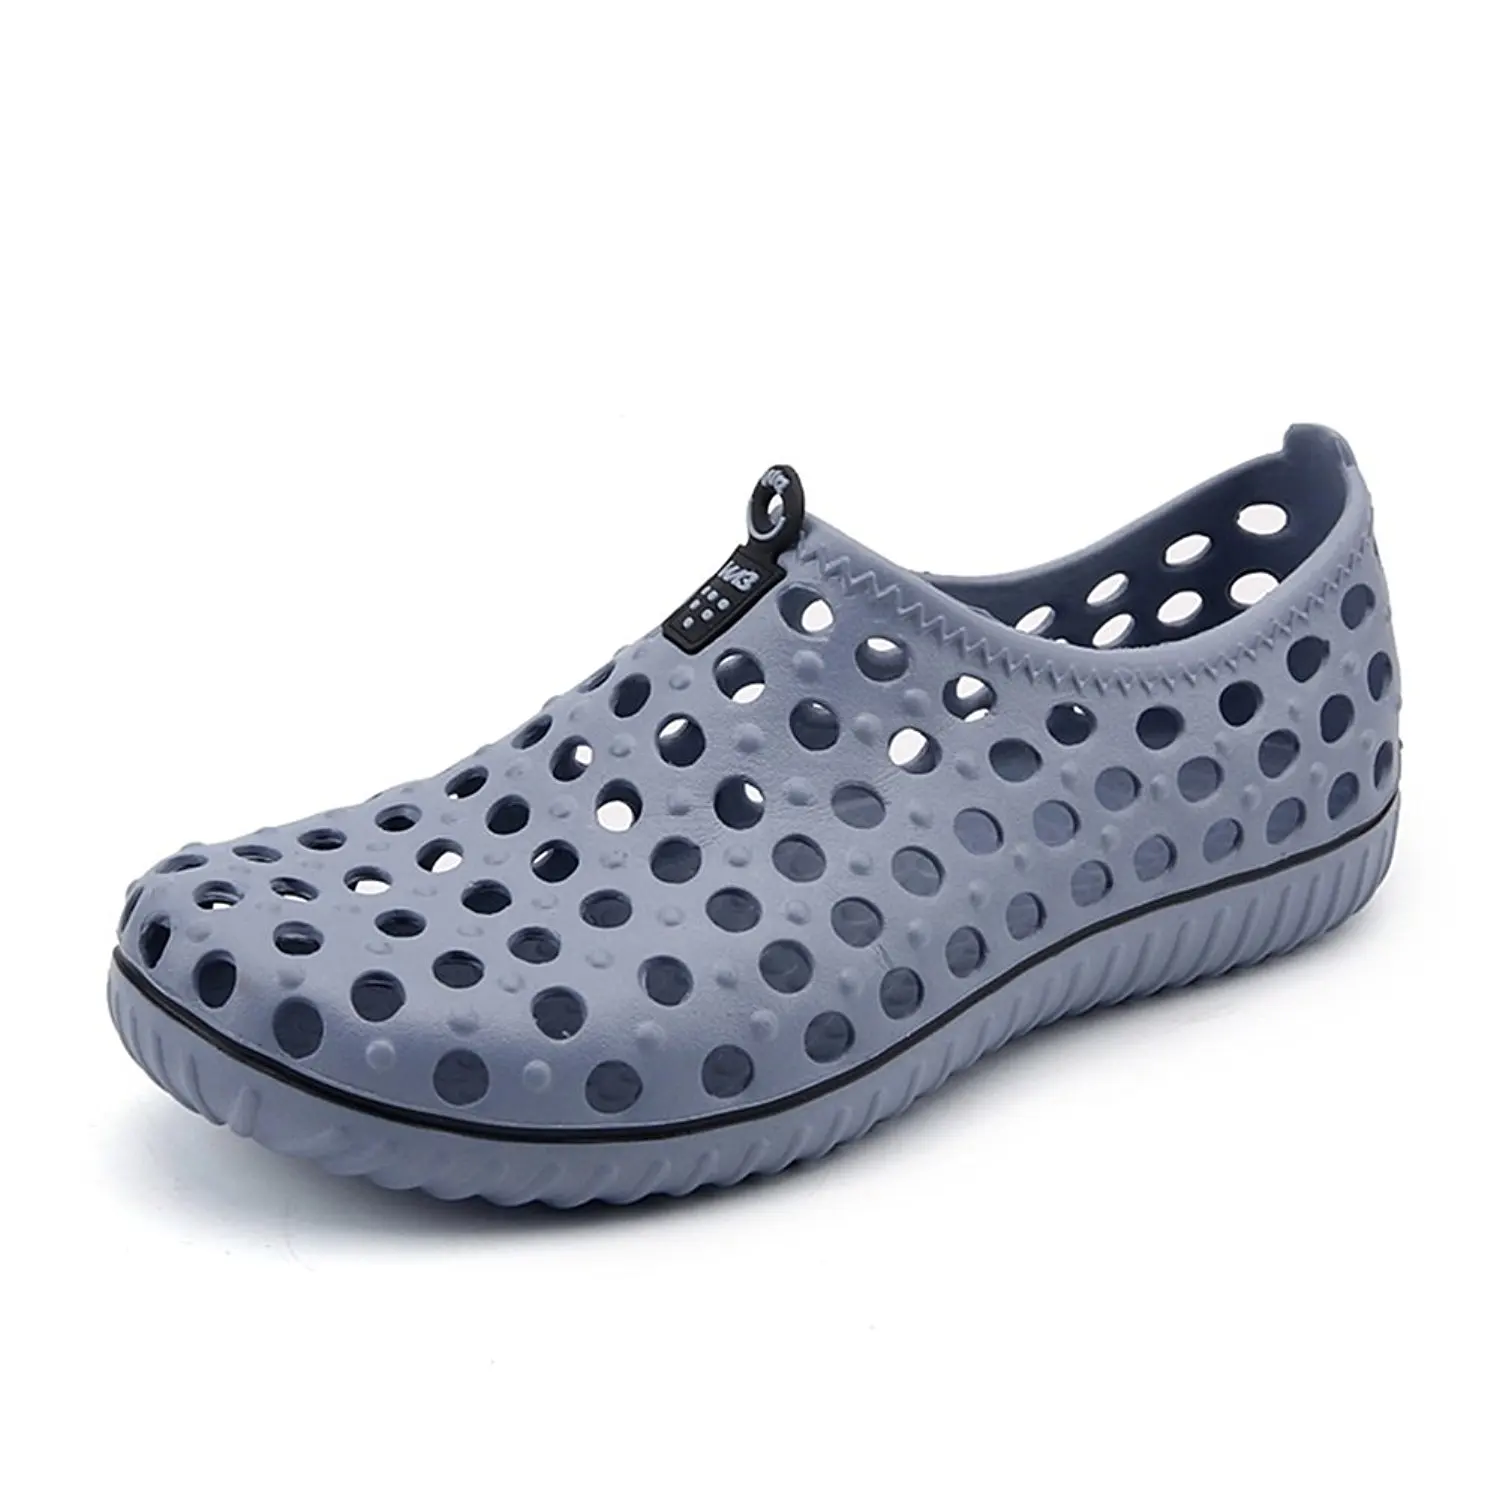 Cheap Black Hole Shoes, find Black Hole Shoes deals on line at Alibaba.com